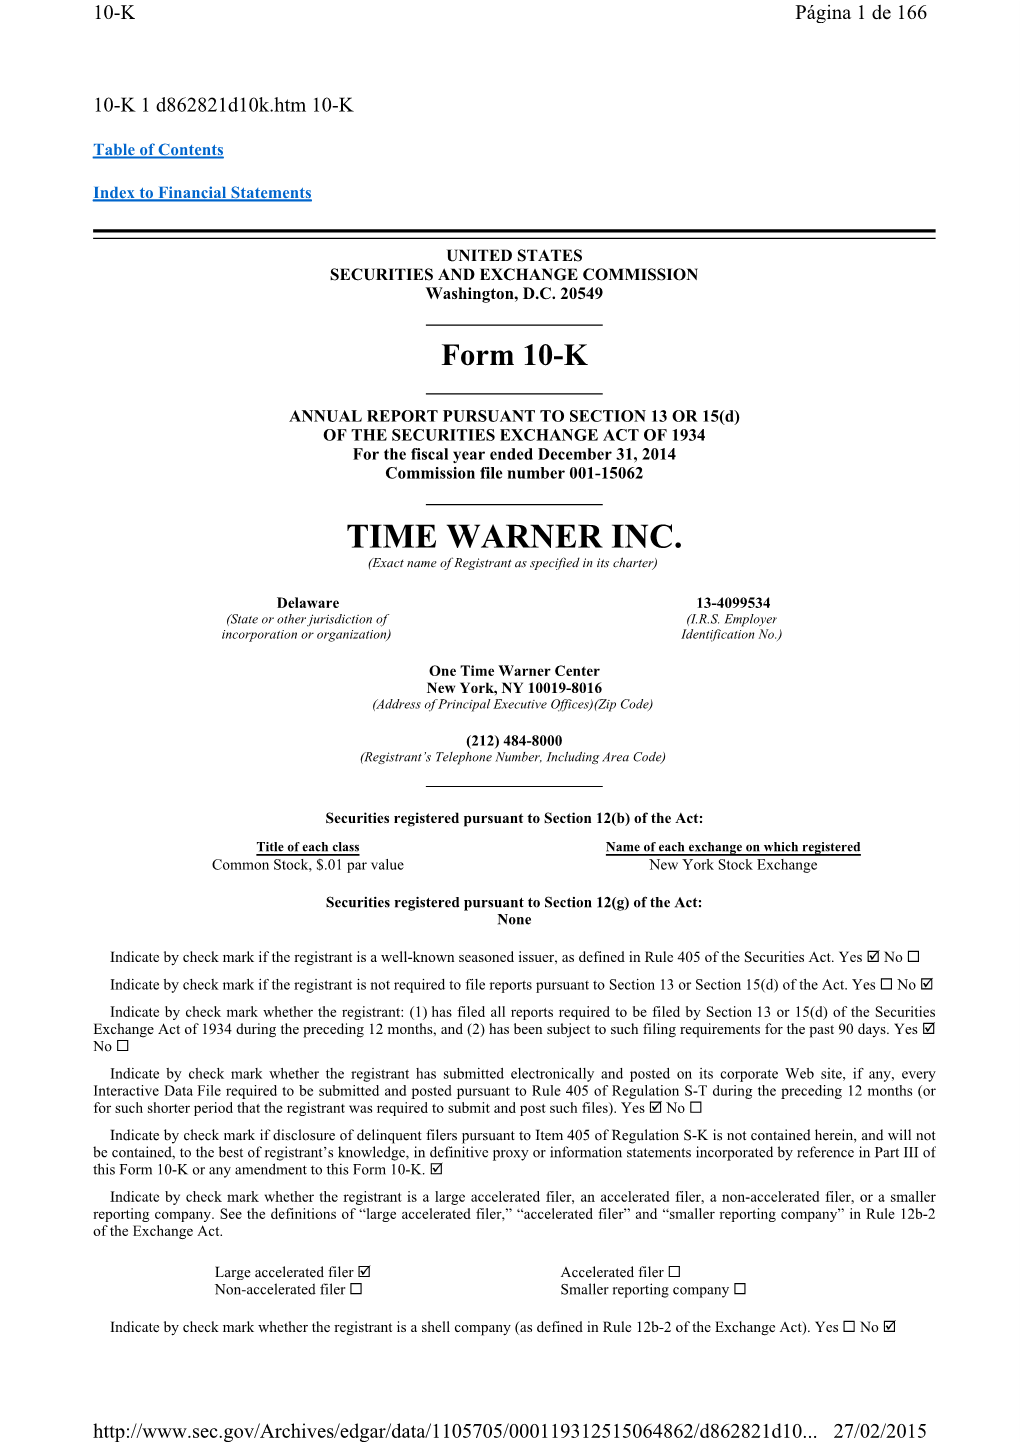 TIME WARNER INC. (Exact Name of Registrant As Specified in Its Charter)